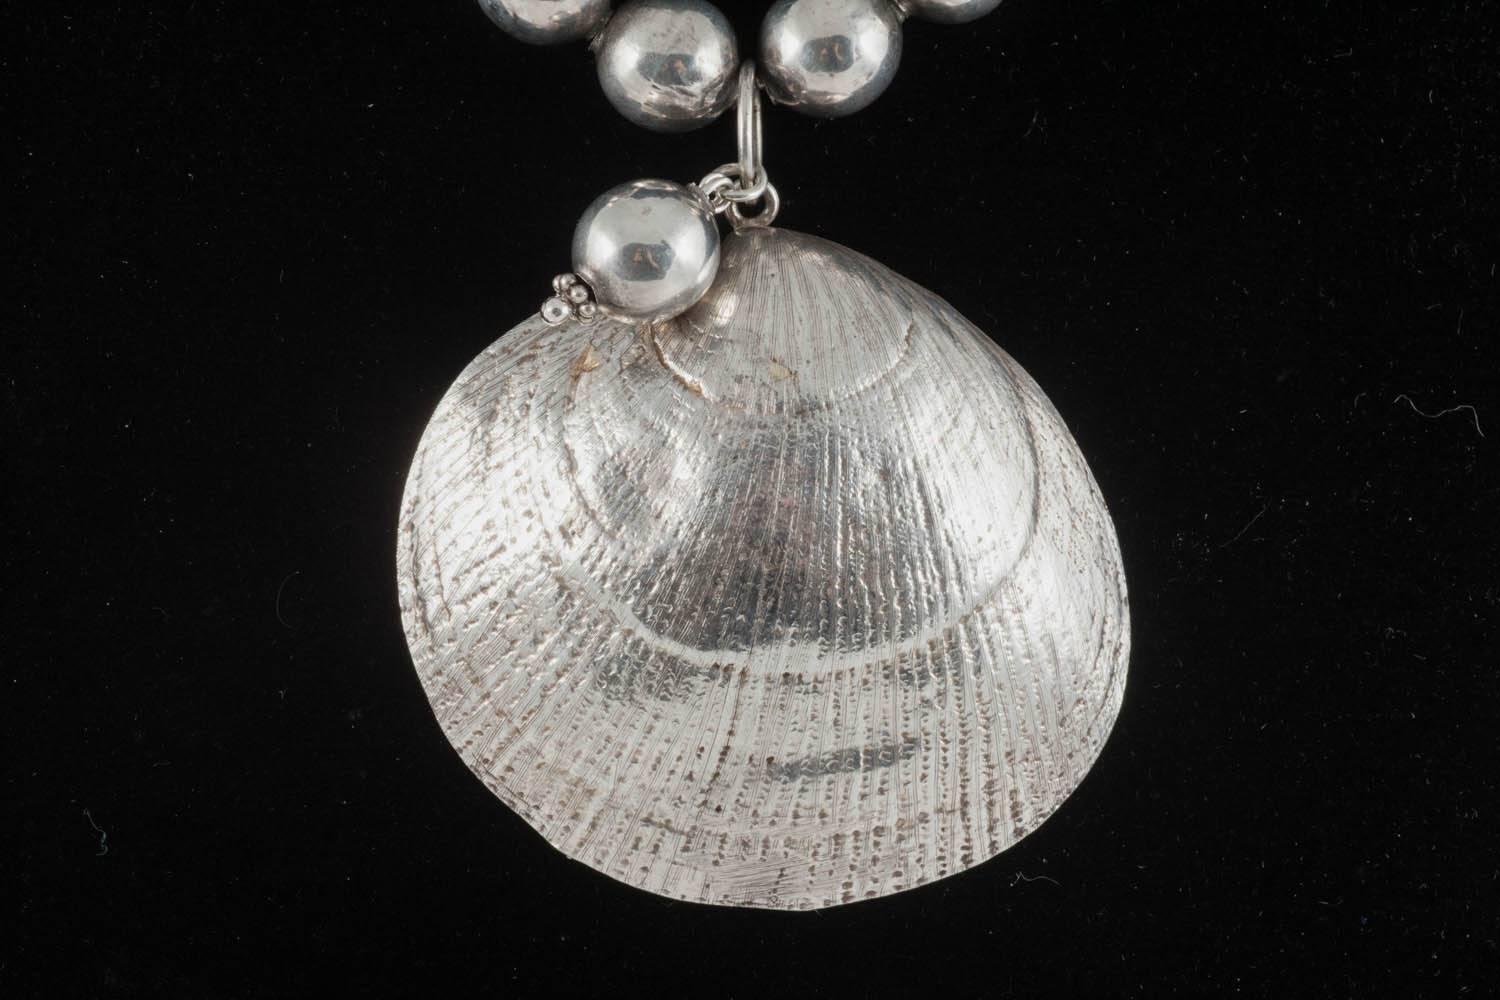 This is a bold, wearable necklace that benefits from being virtually weightless. The ball dangling at the front of the shell also sits snugly behind the pendant like a pearl nestling in its shell. Only you will know that it is there. I am not able